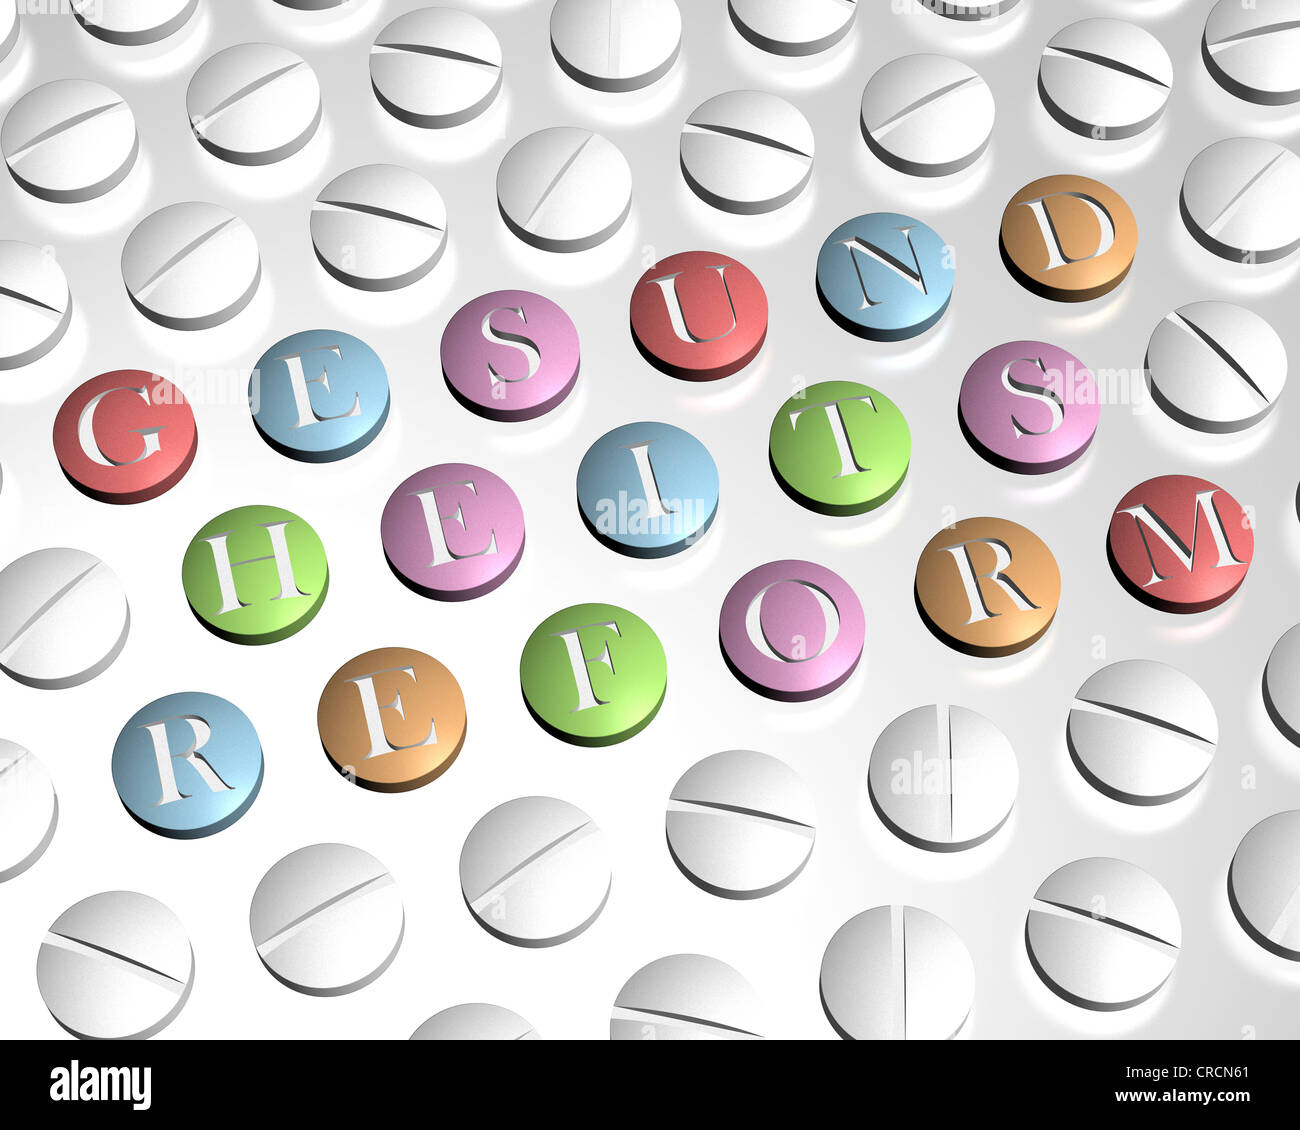 Tablets spelling the word Gesundheitsreform, symbolic image for the German health care reform, illustration Stock Photo